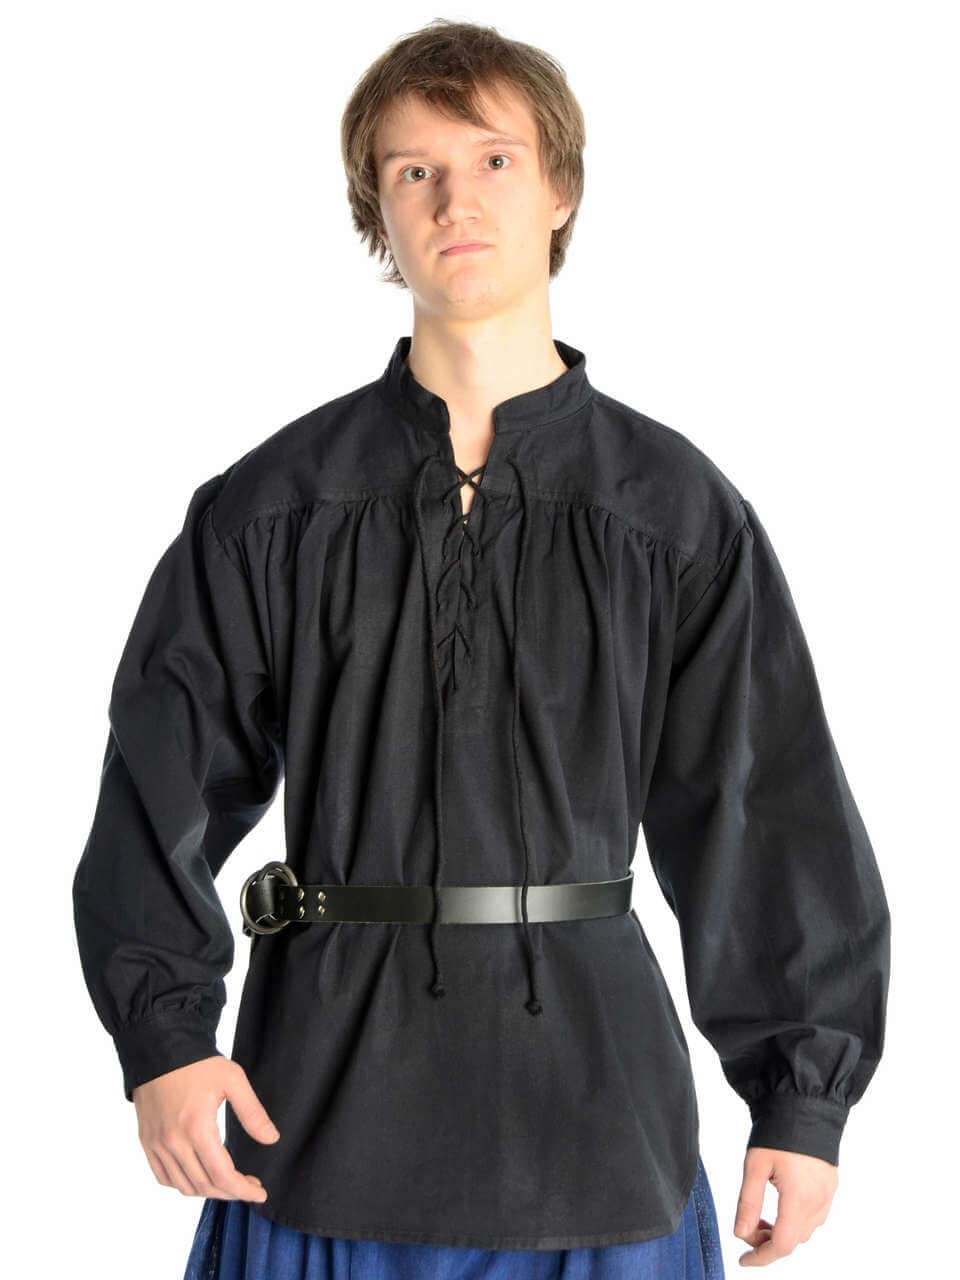 Medieval Shirt with stand-up collar